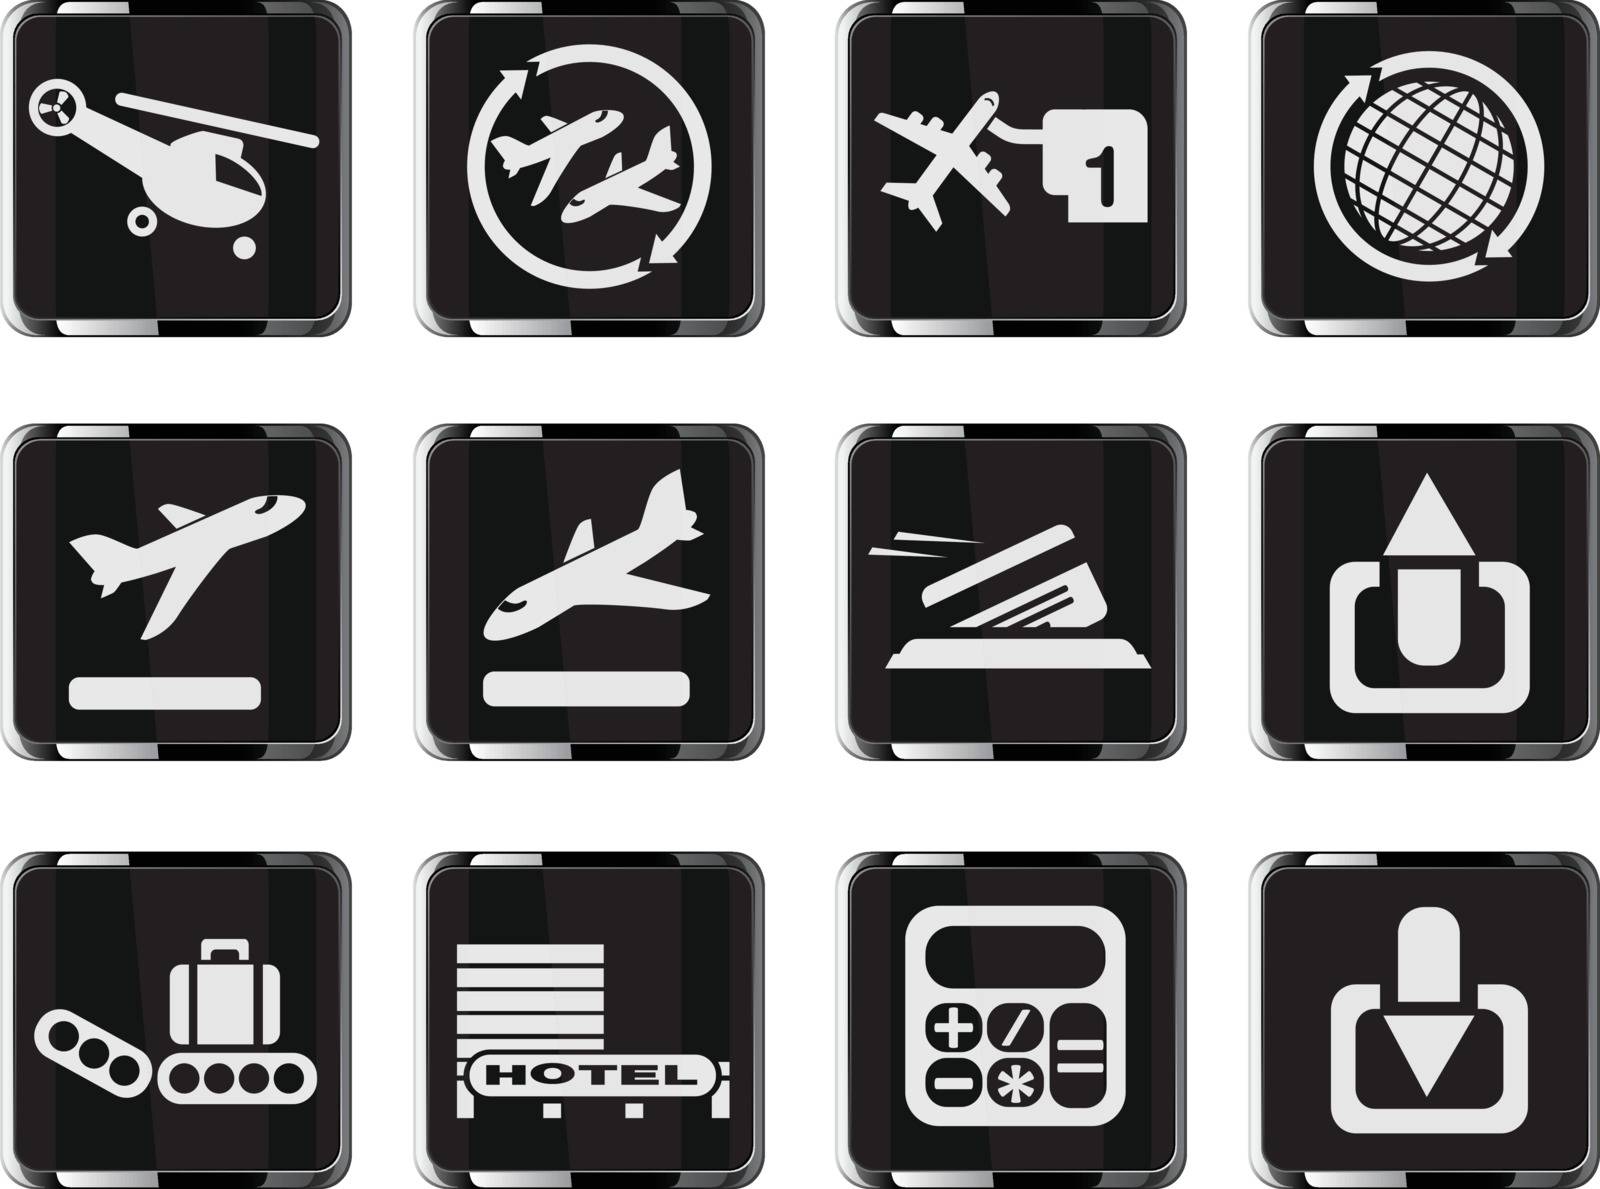 Airport icons by ayax